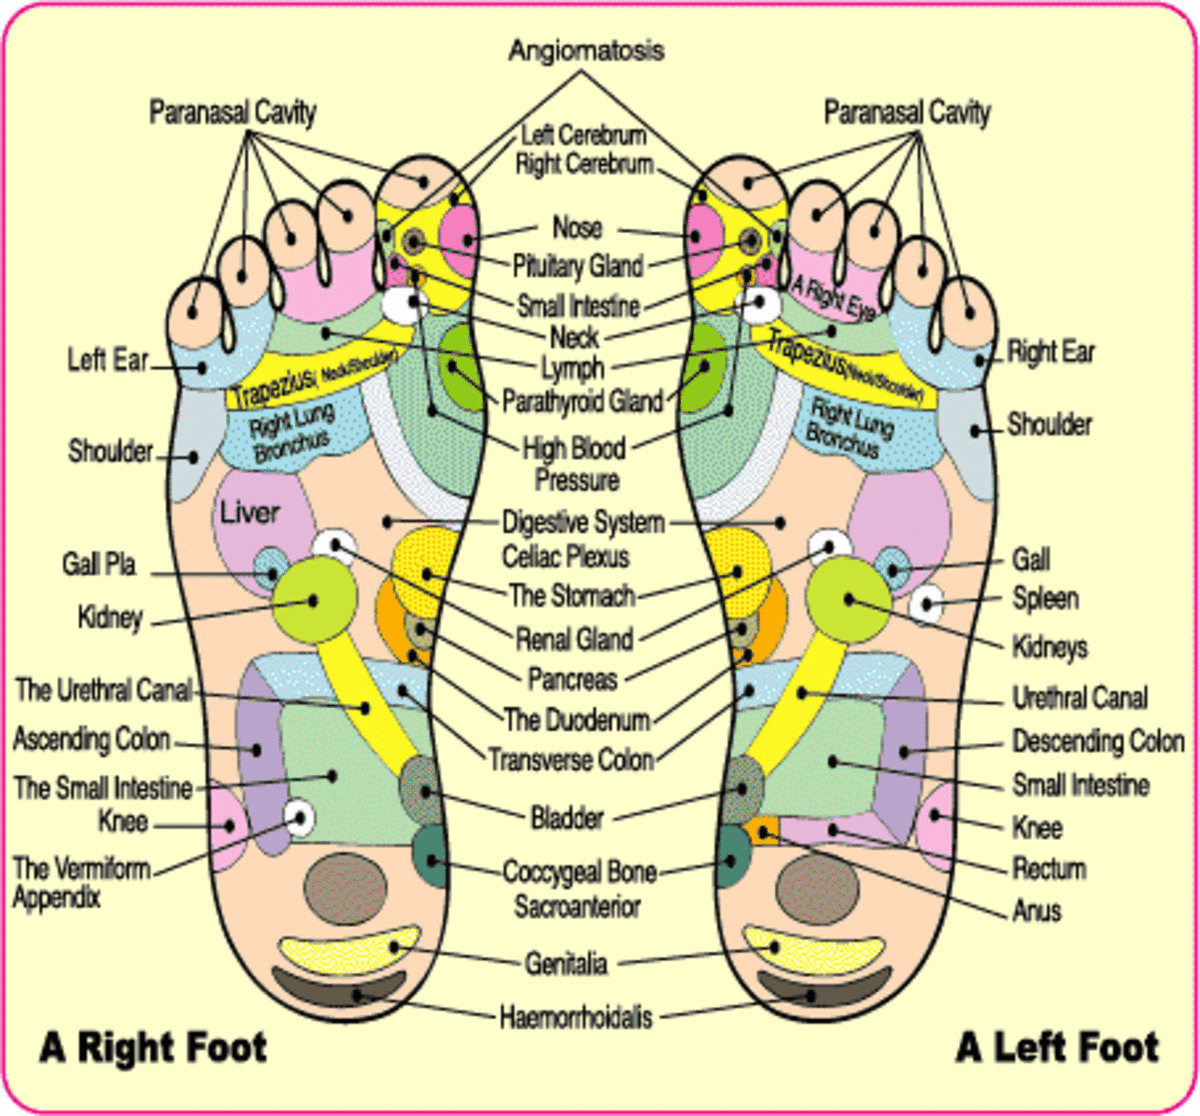 Here's one version of a reflexology chart.